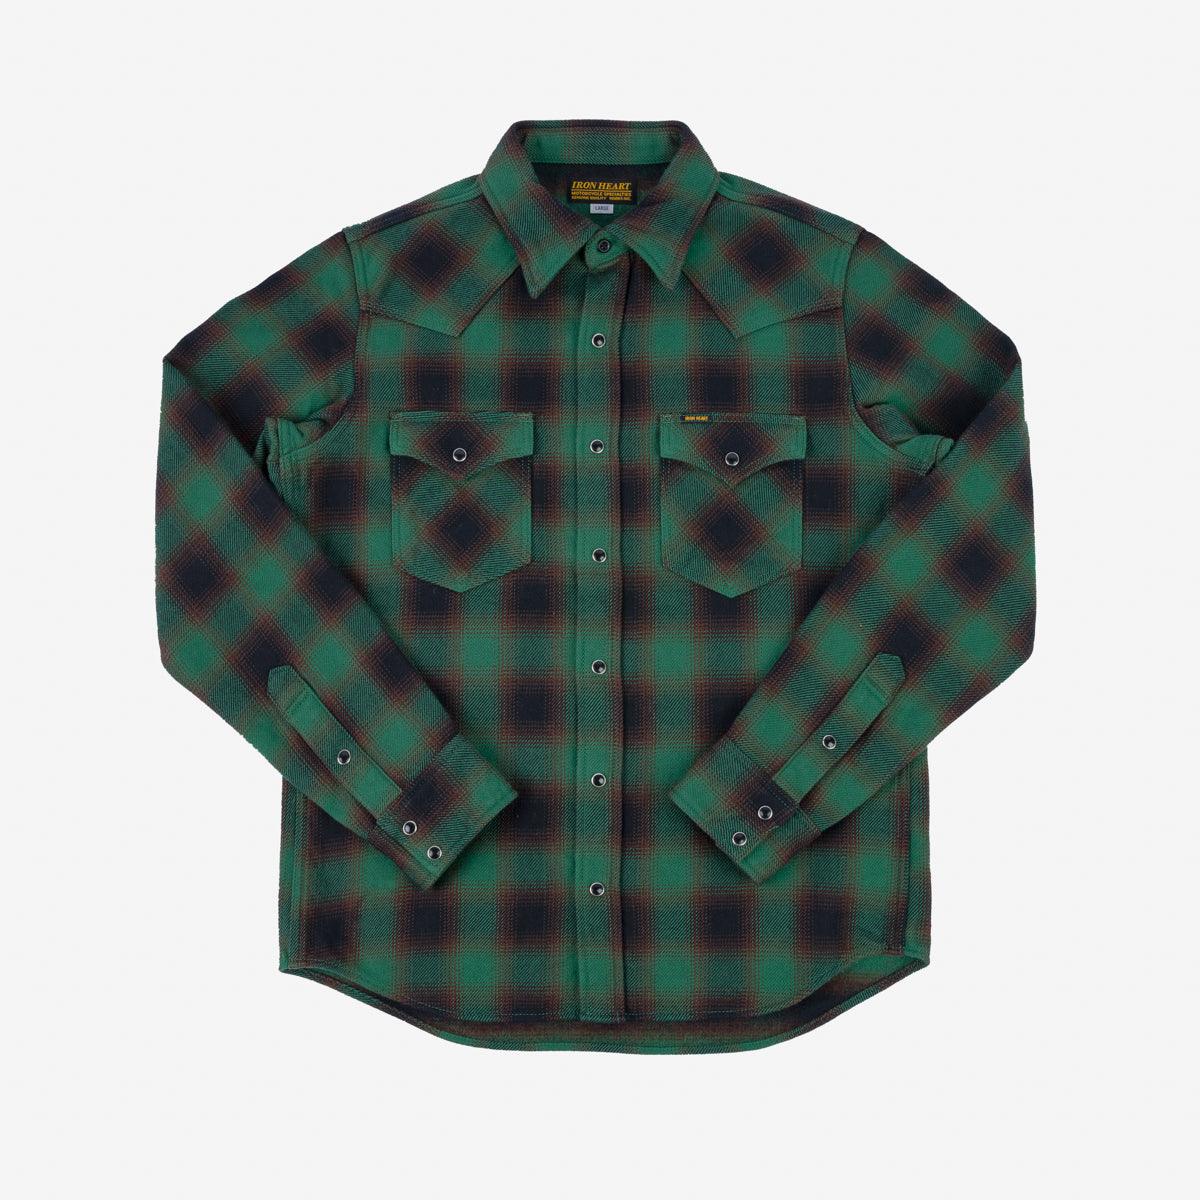 IHSH-373-GRN - Ultra Heavy Flannel Ombre Check Western Shirt - Green